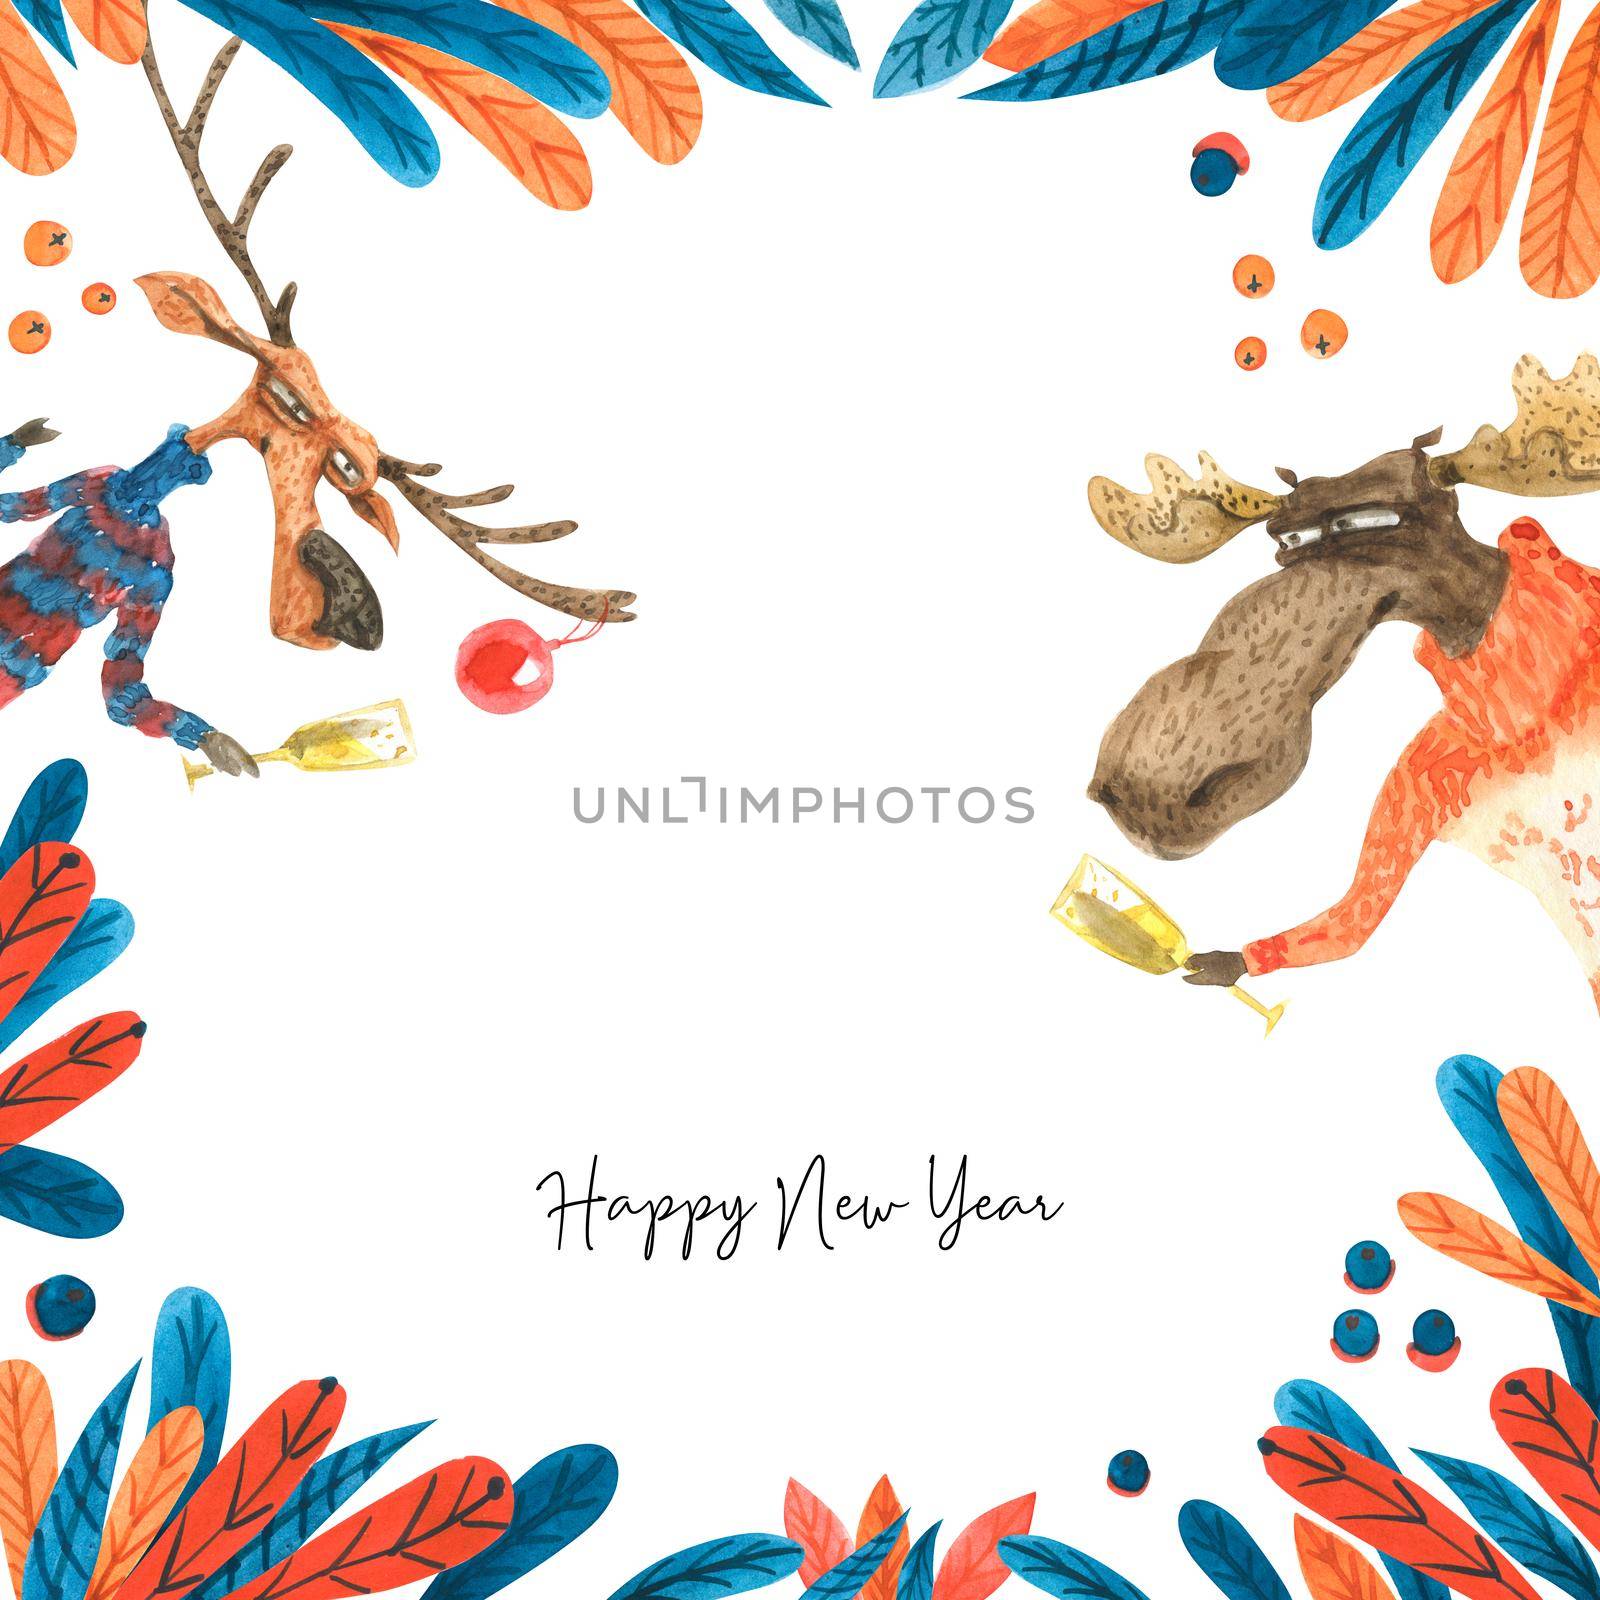 Christmas watercolor frame with drinking moose and deer, clipping path included